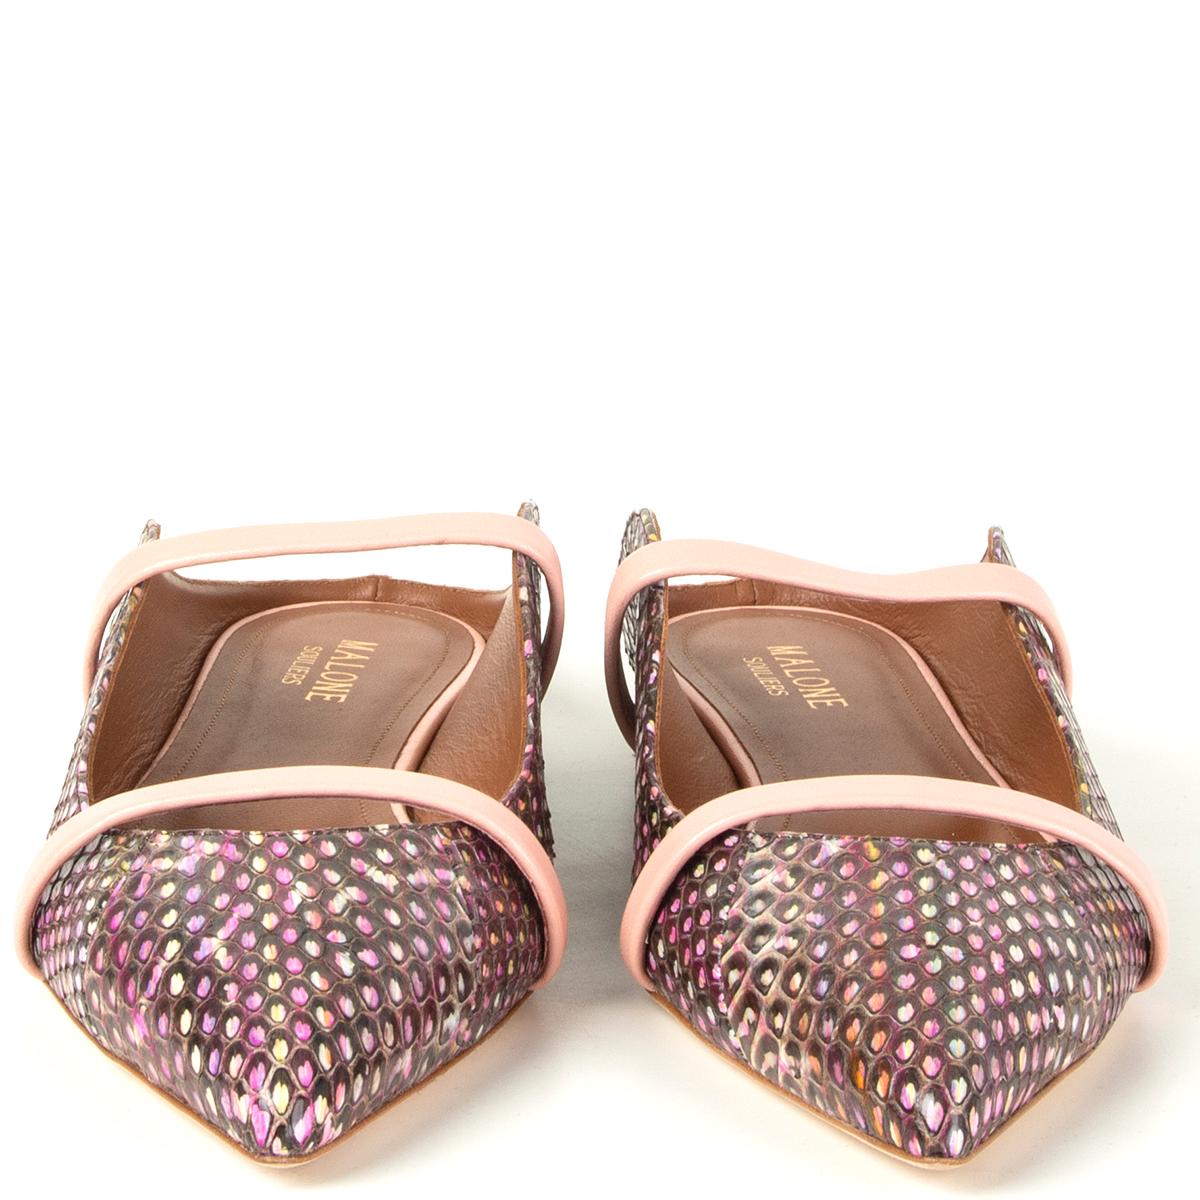 100% authentic Malone Souliers 'Maureen' pointed-toe flat mules in lilac, vanilla, brown, baby blue, yellow and baby pink snakeskin and leather. Brand new. Come with dust bag. 

Measurements
Imprinted Size	38
Shoe Size	38
Inside Sole	25cm